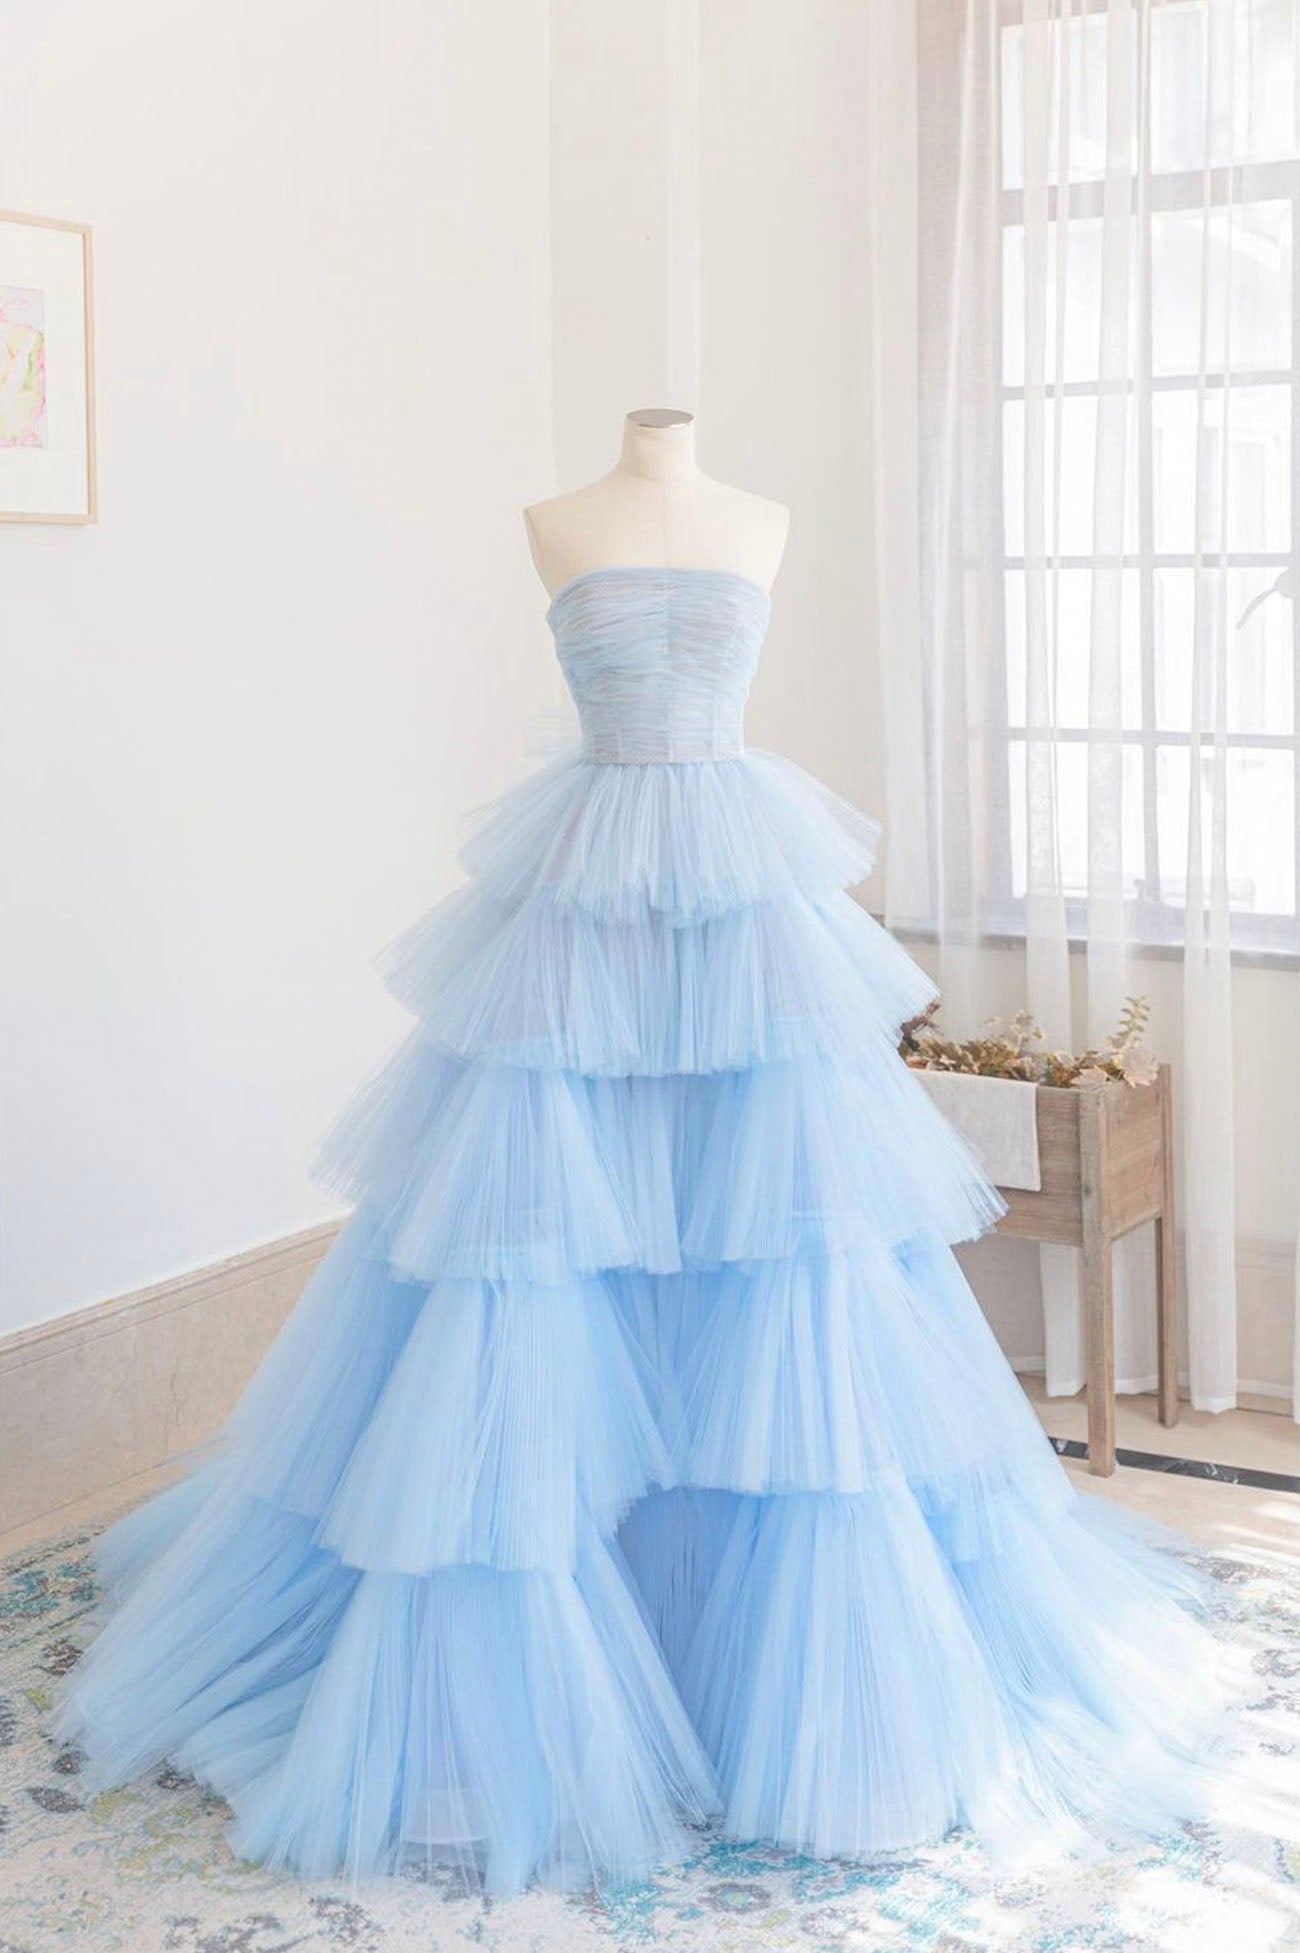 Bridesmaid Dresses Neutral, Blue Strapless Tulle Layers Long Prom Dress, A-Line Evening Dress